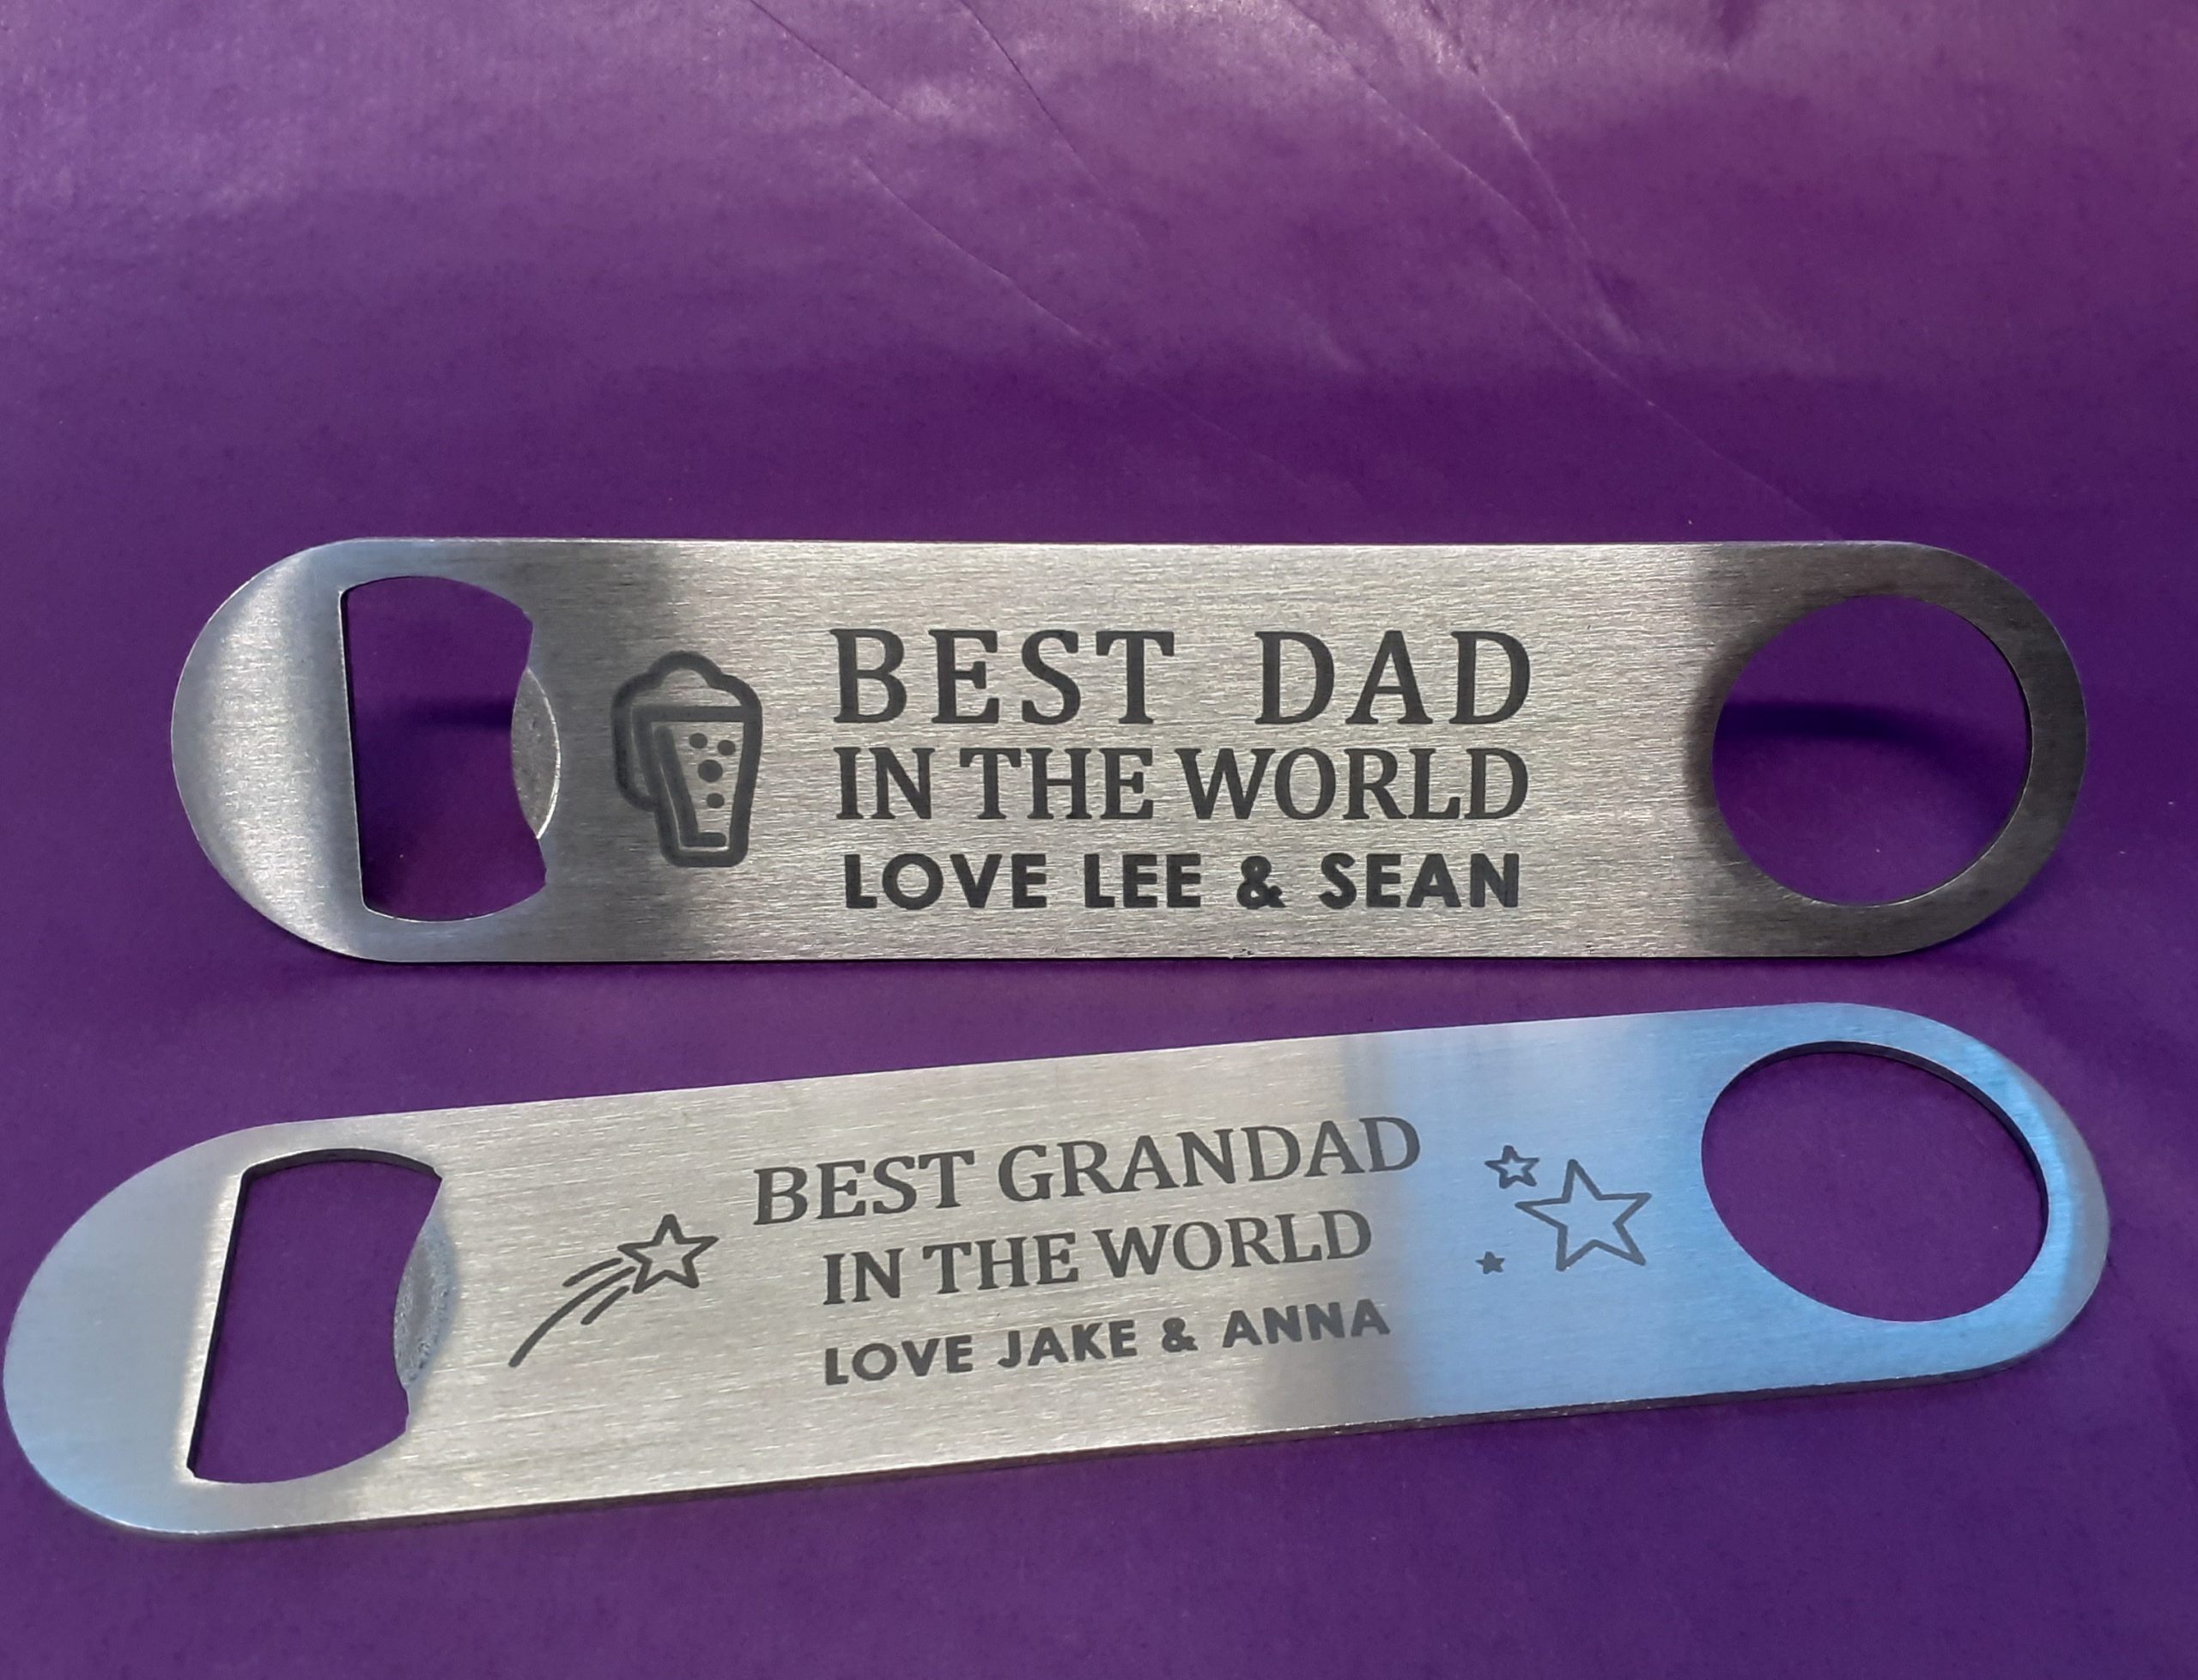 Two High-quality stainless steel bar blade bottle openers with a sleek design and custom engraving, ideal for various occasions.